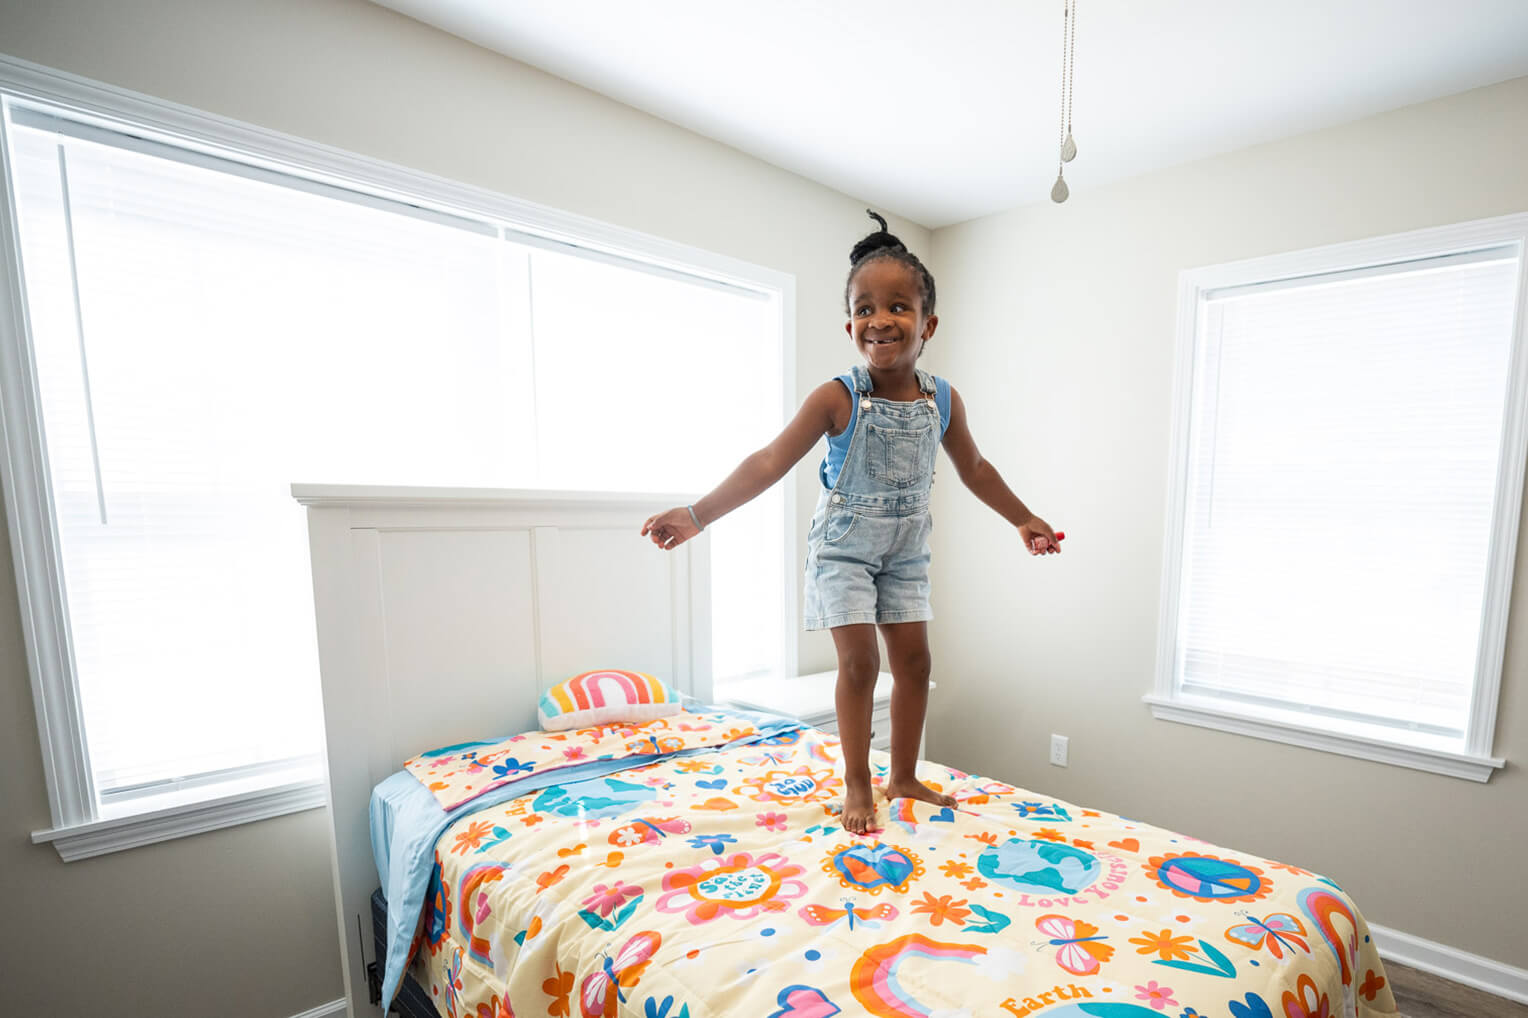 Josh and Brenna's daughter jumps joyfully on her bed at the dedication of her family's new home in Mayfield, Kentucky.